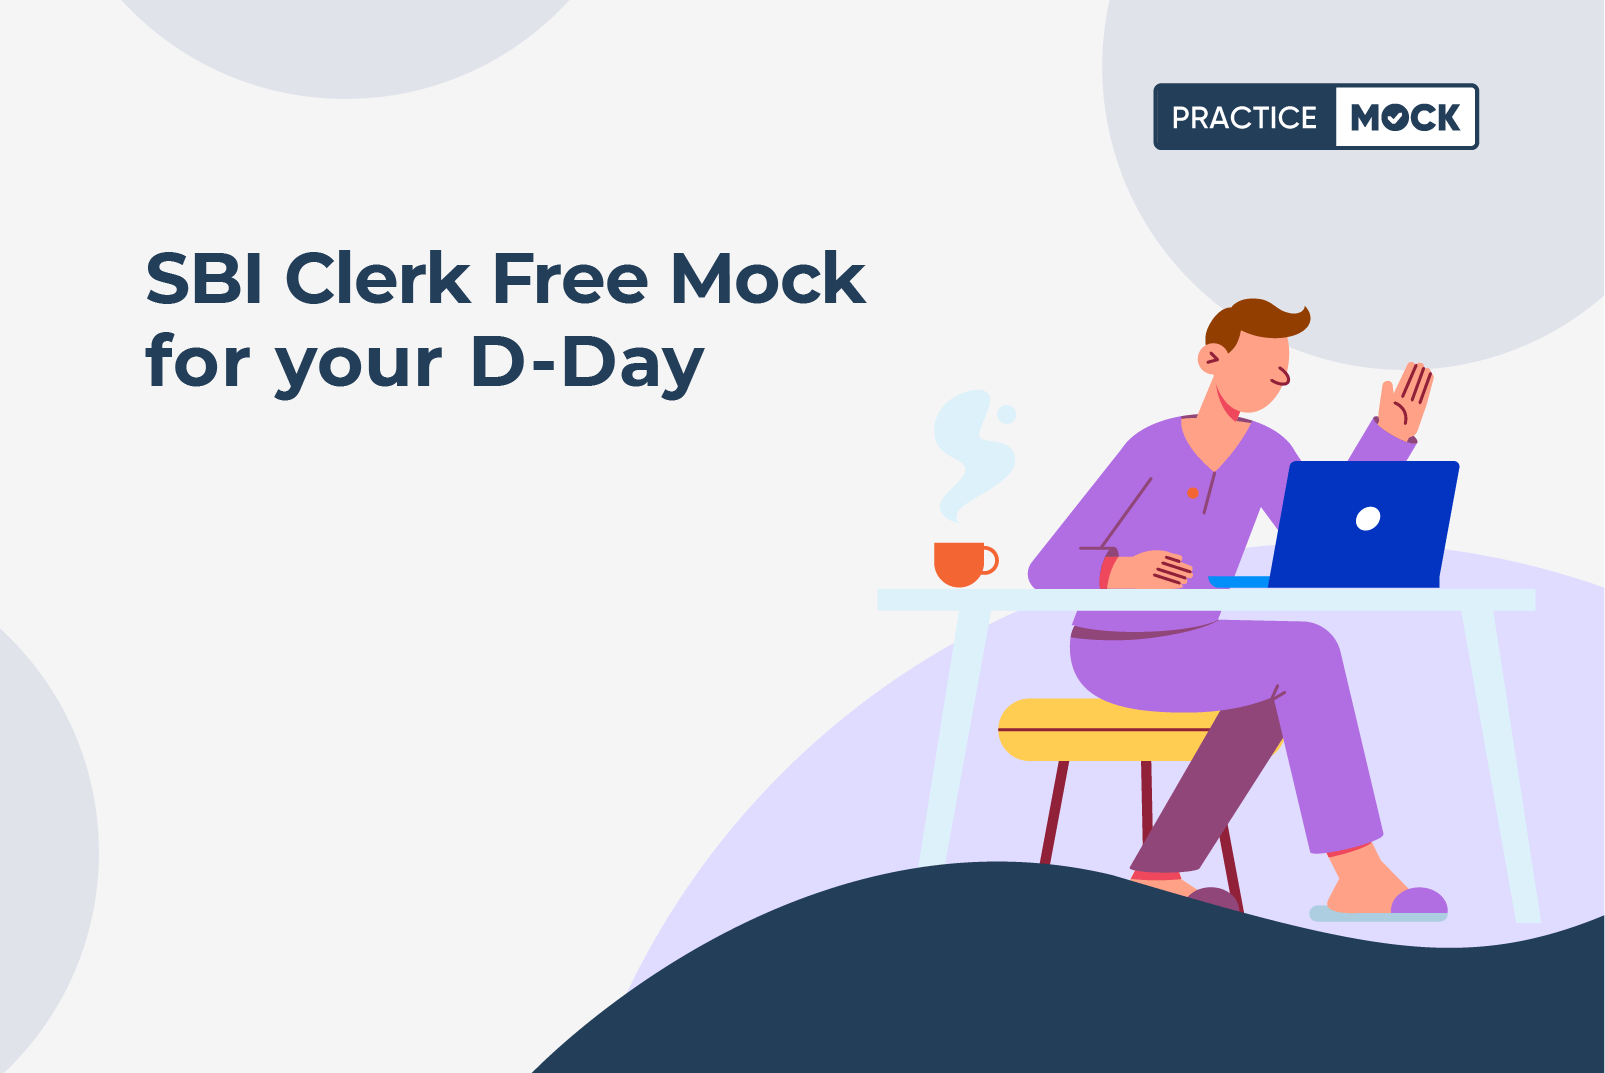 SBI Clerk Free Mock for your D-Day